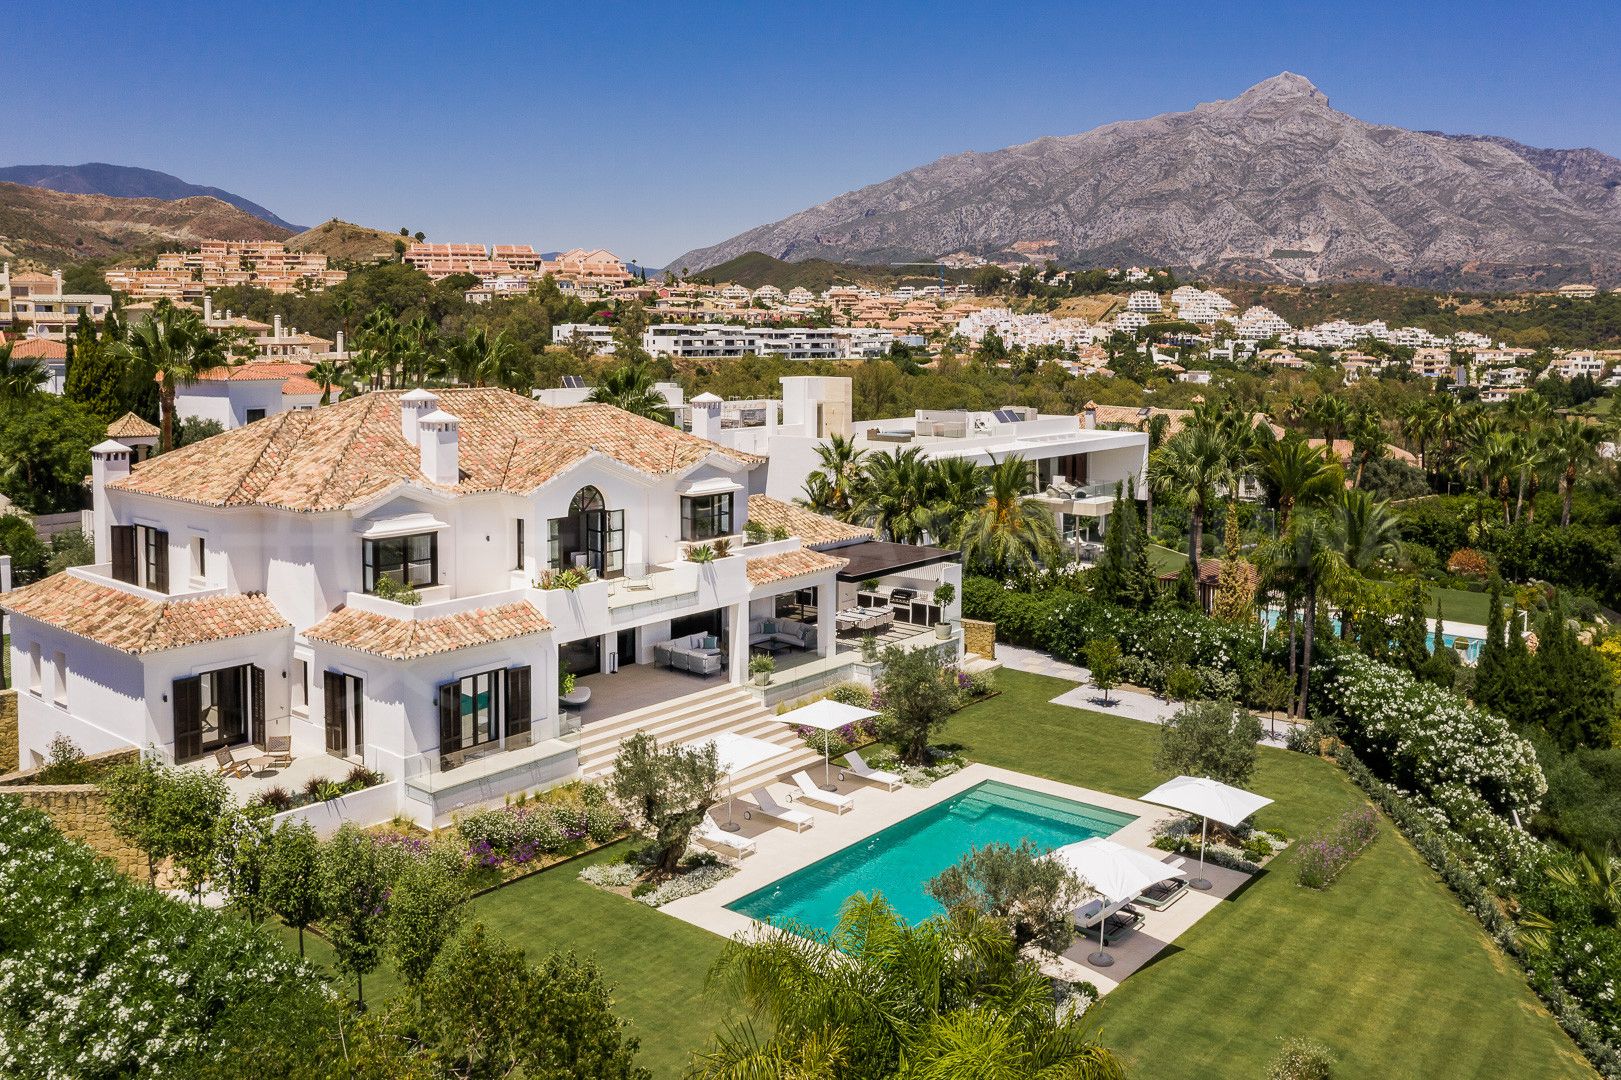 An amazing new property for sale from Terra Meridiana, Villa Cerquilla in Nueva Andalucia